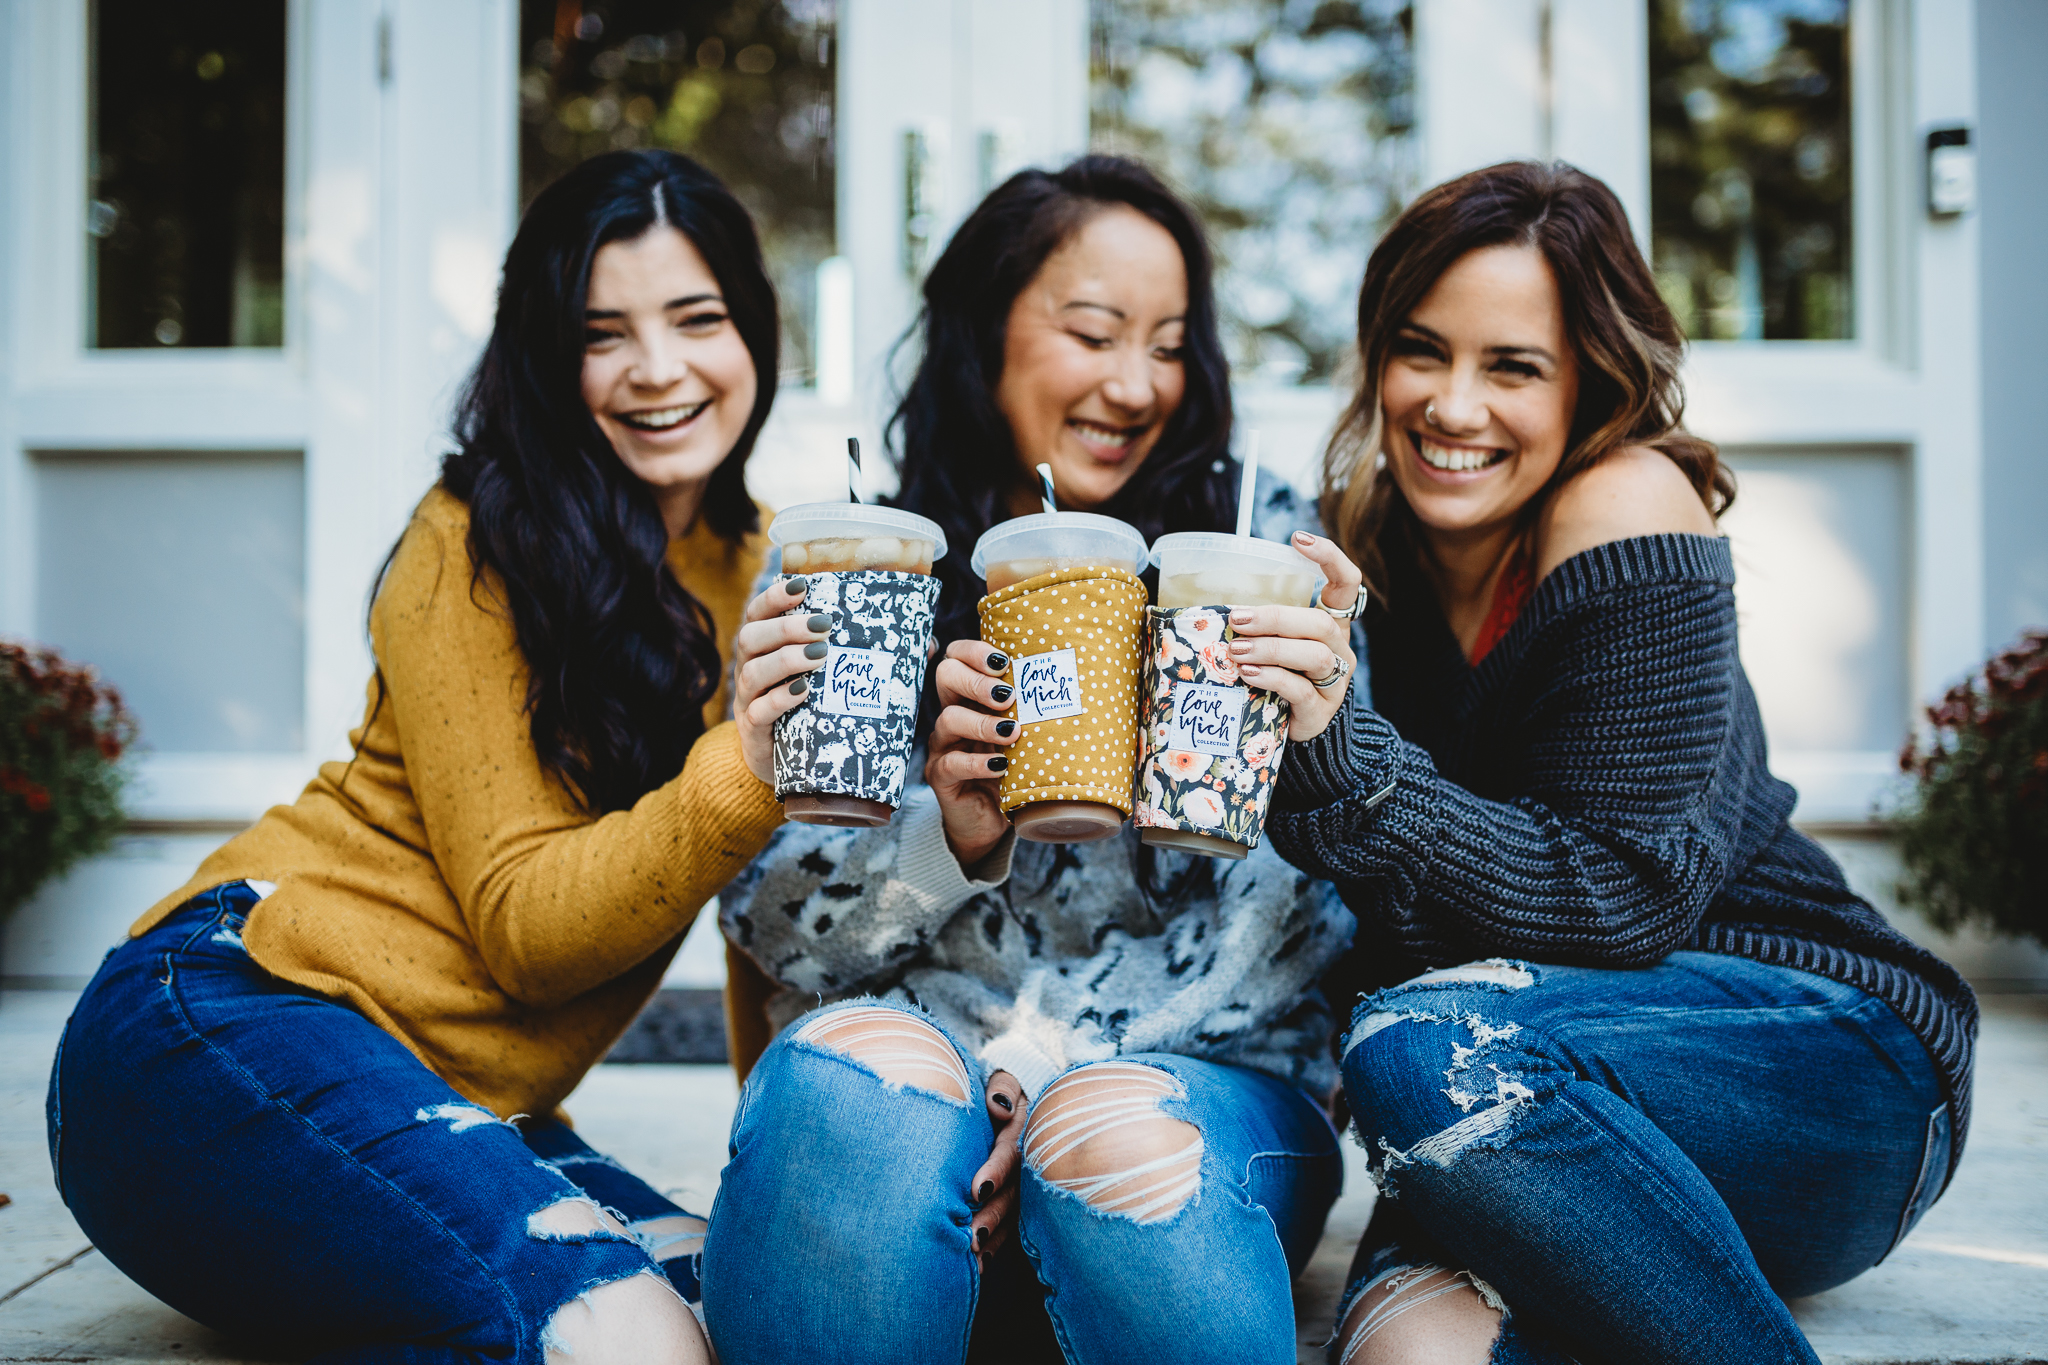 Friends love gifting friends cute Coffee Cozies from The Love Mich Collection!